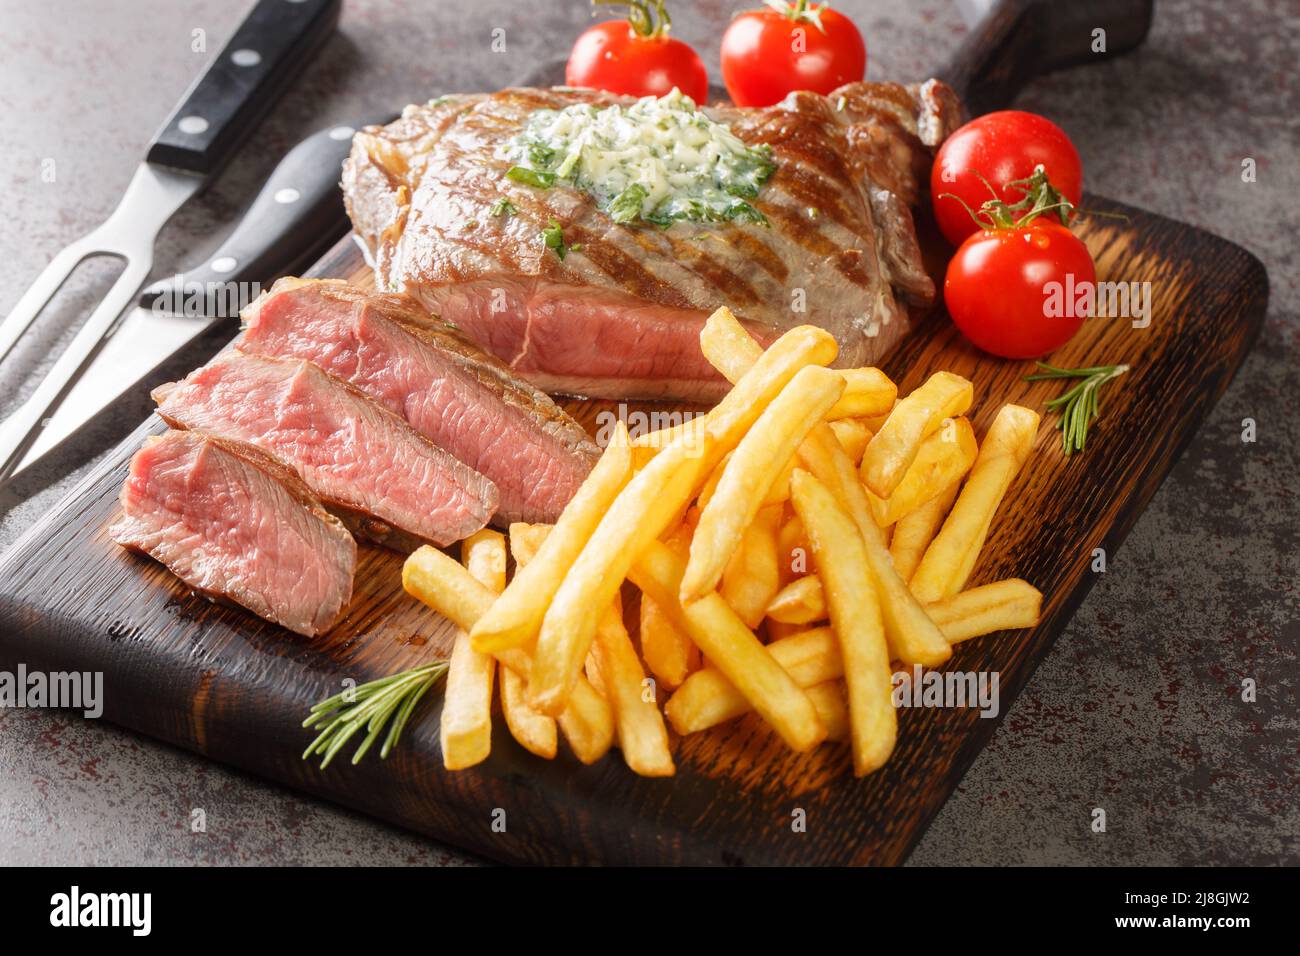 Medium Grilled Beef Steak with French Fries closeup on the wooden board on the table. Horizontal Stock Photo